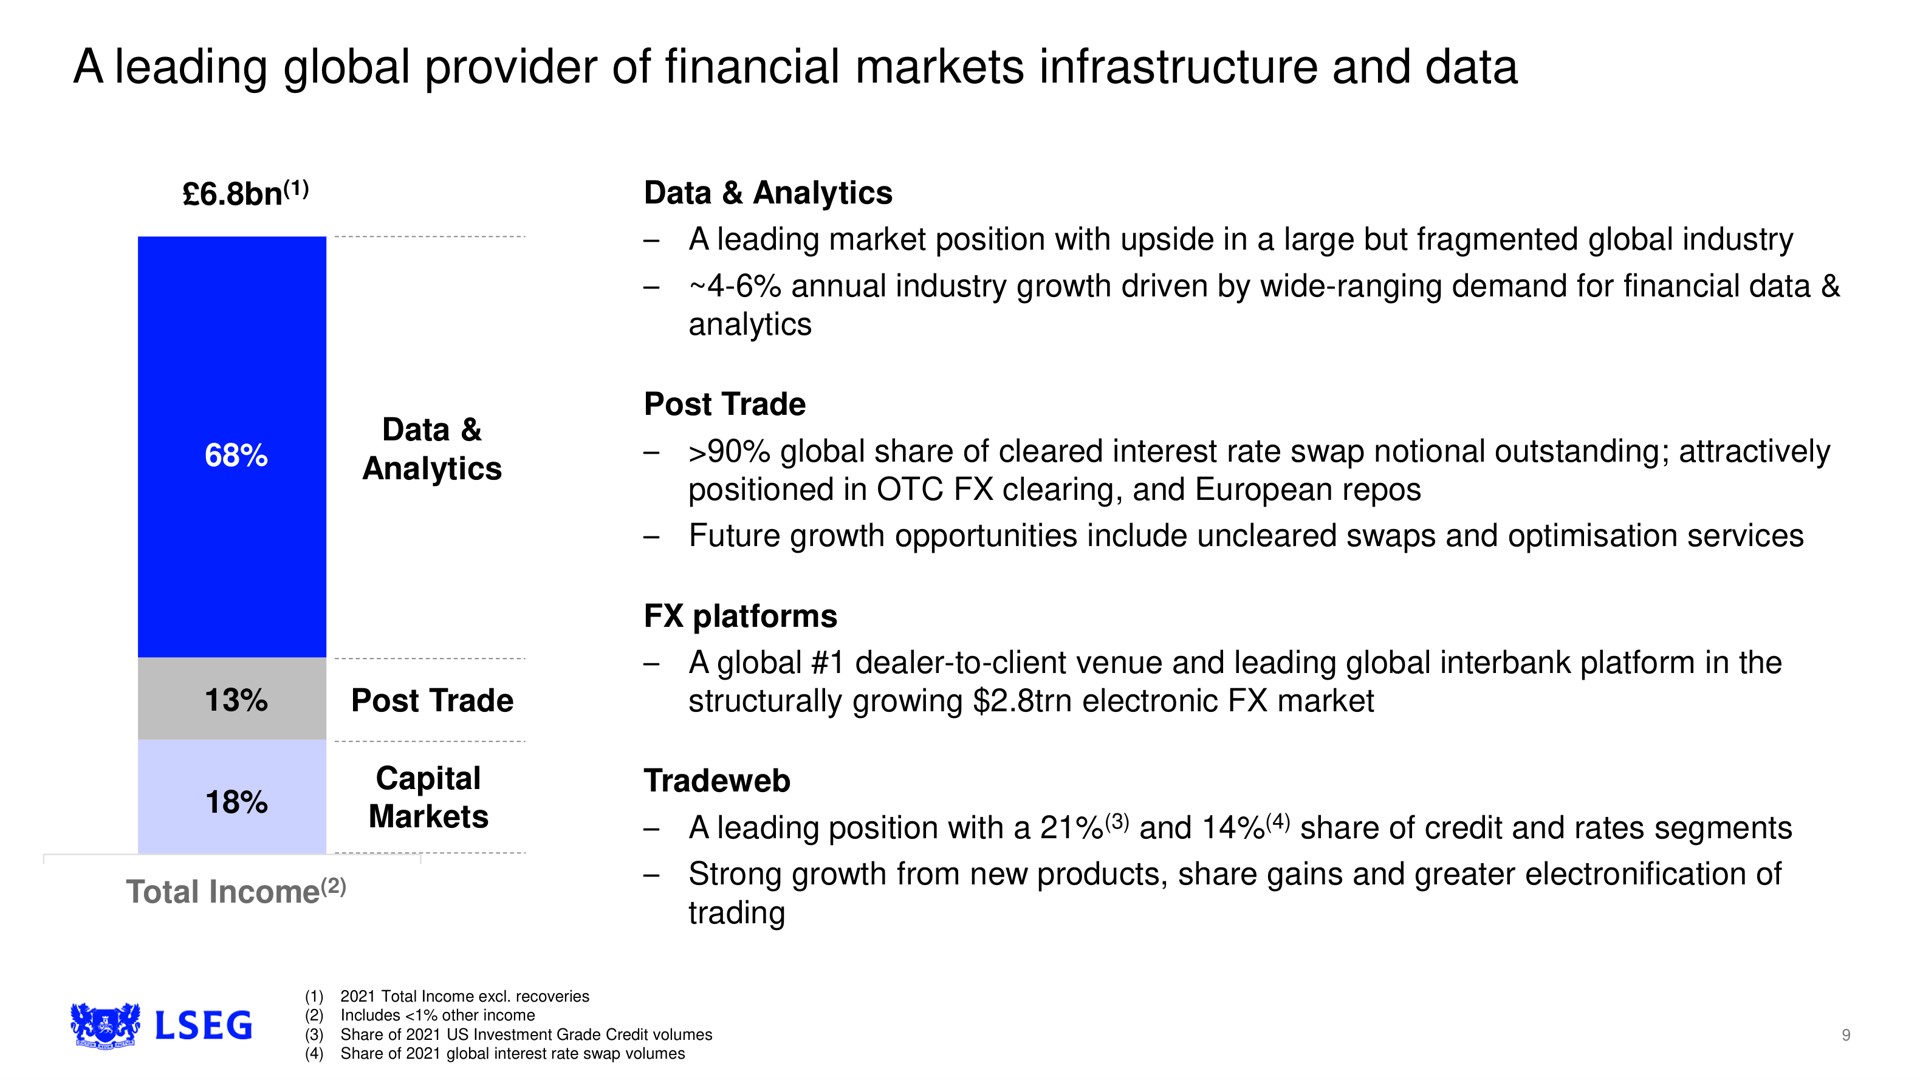 a leading global provider of financial markets infrastructure and data | LSE